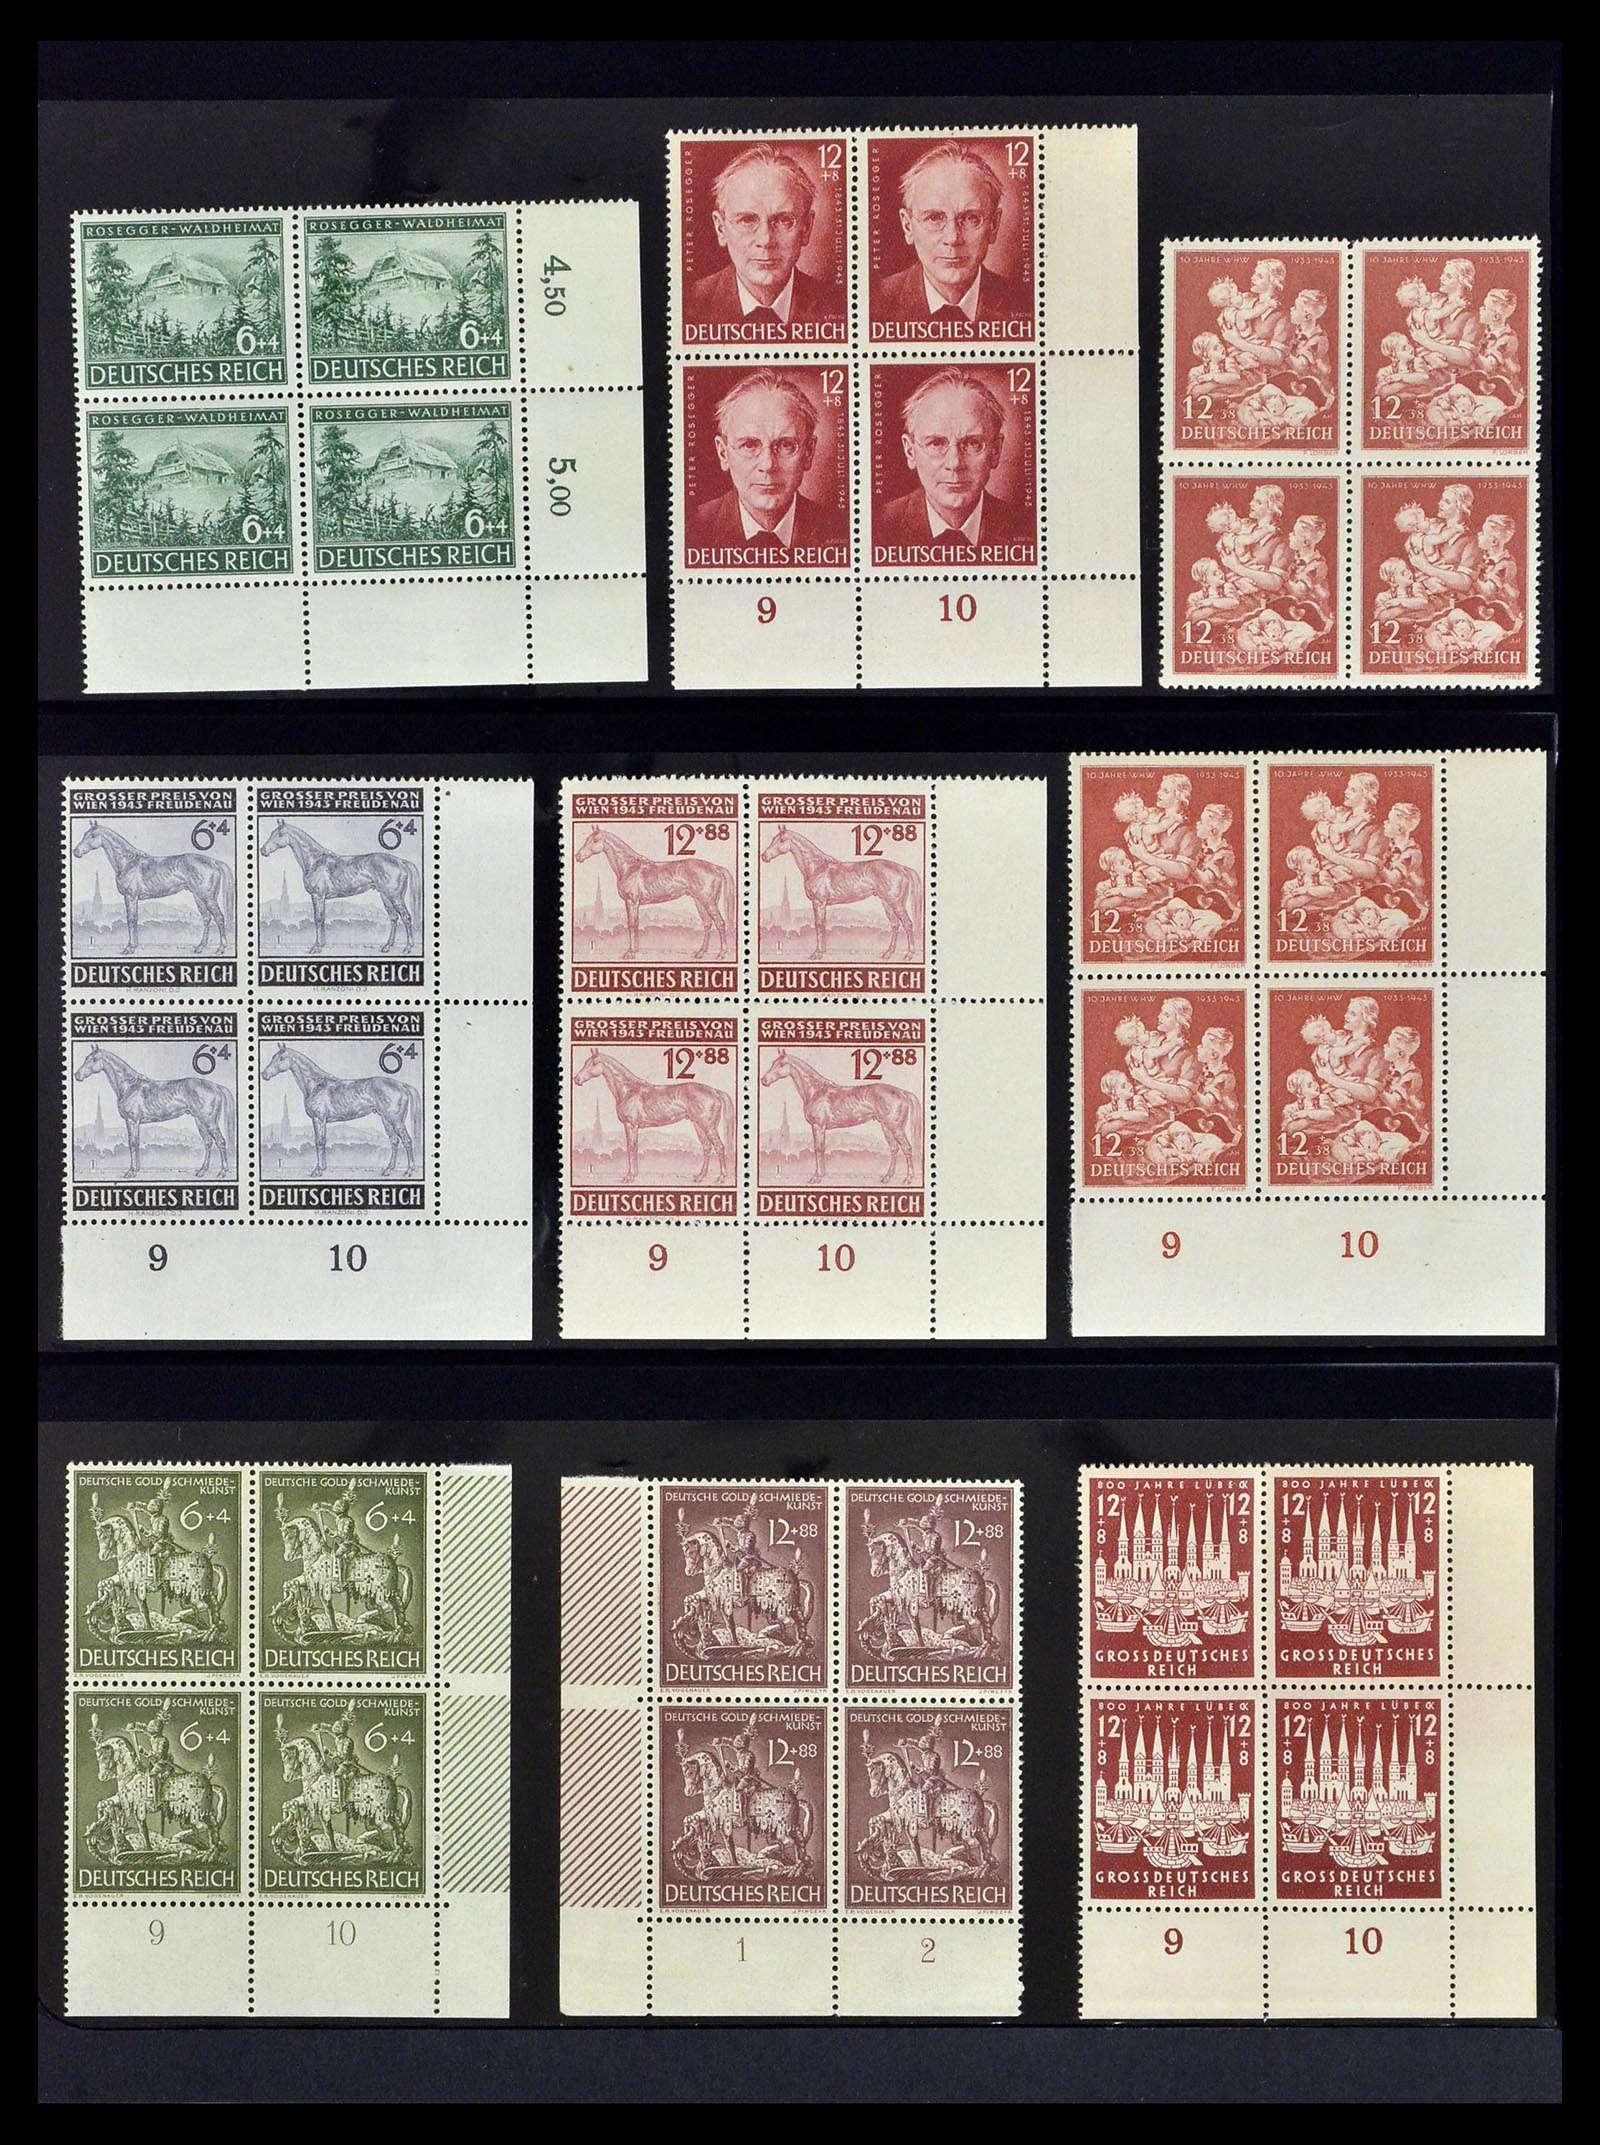 39255 0026 - Stamp collection 39255 German Reich MNH blocks of 4.